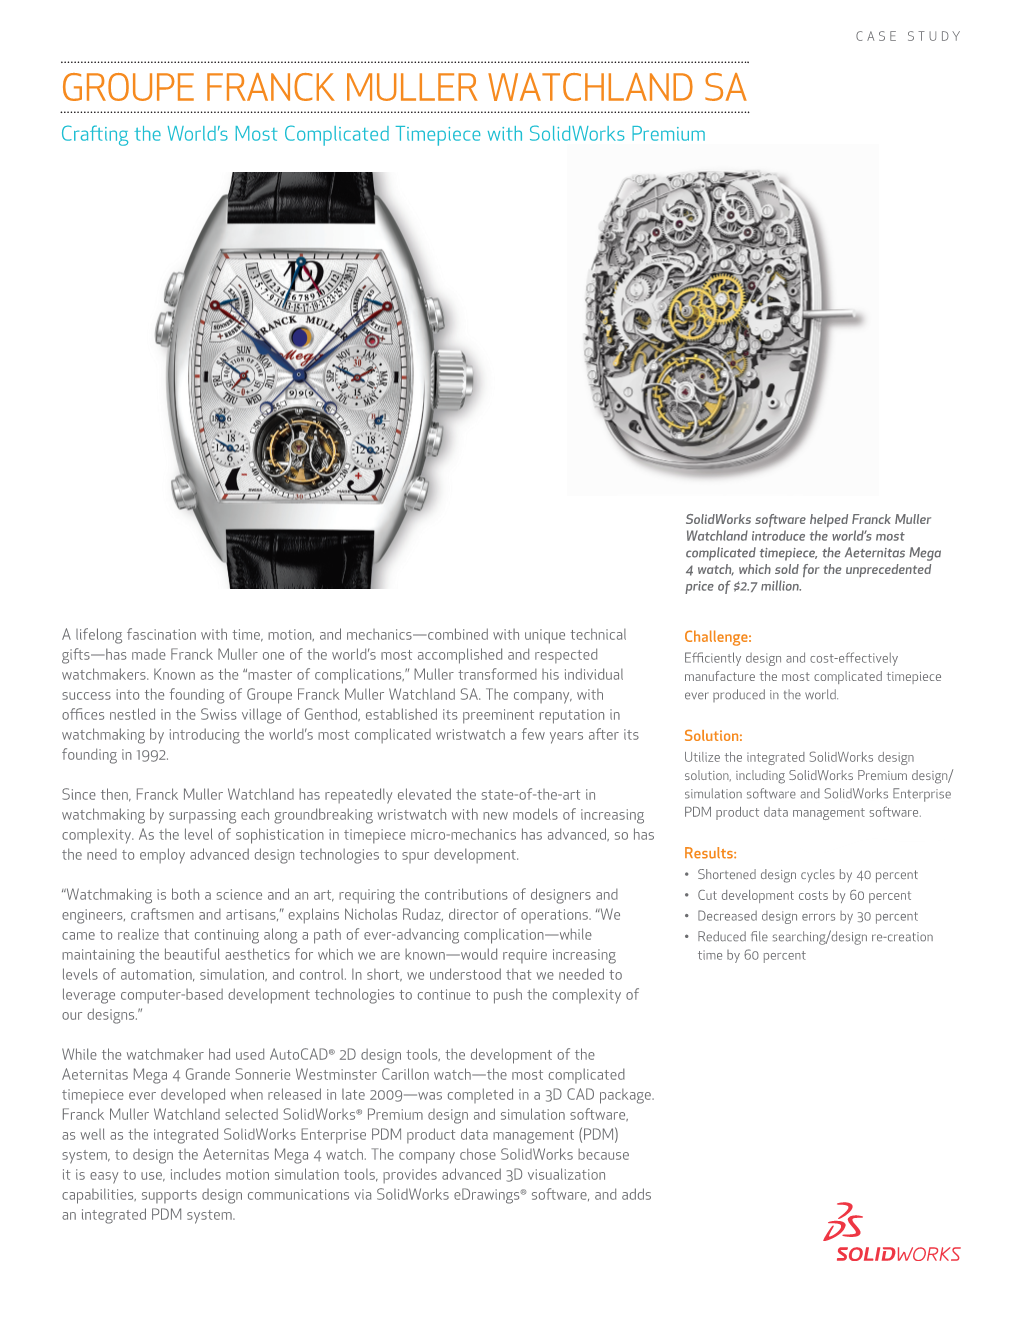 GROUPE FRANCK MULLER WATCHLAND SA Crafting the World’S Most Complicated Timepiece with Solidworks Premium